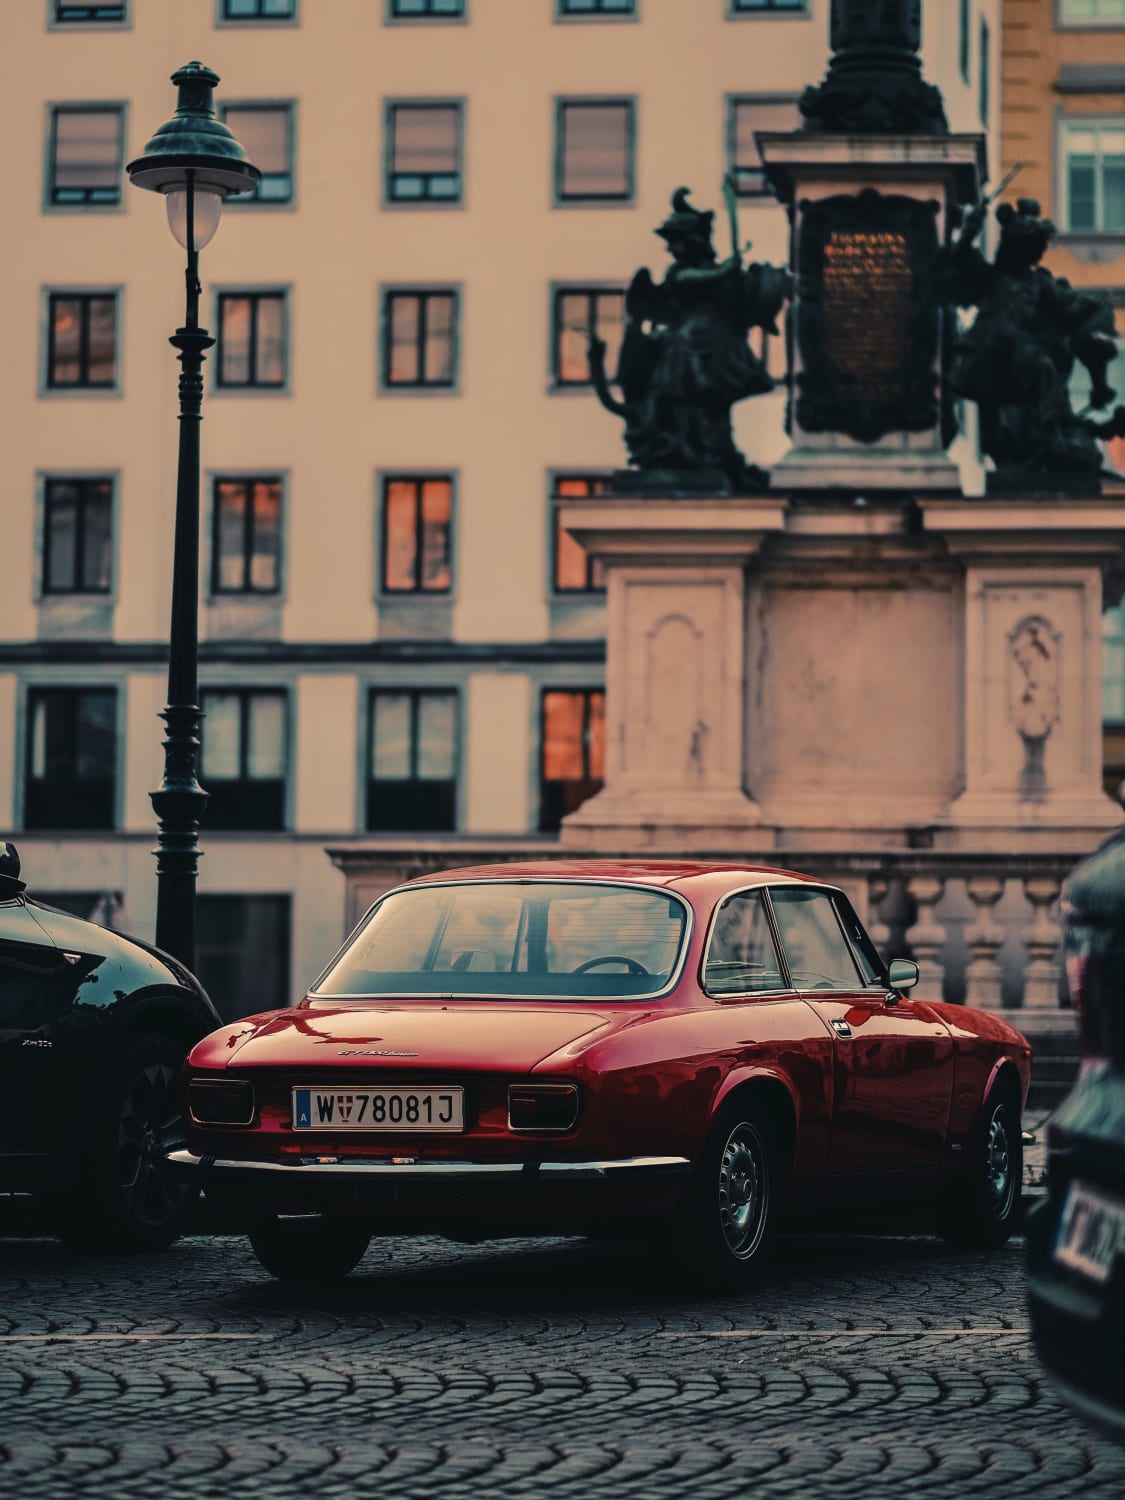 ITAP of an old Alfa Romeo in Vienna